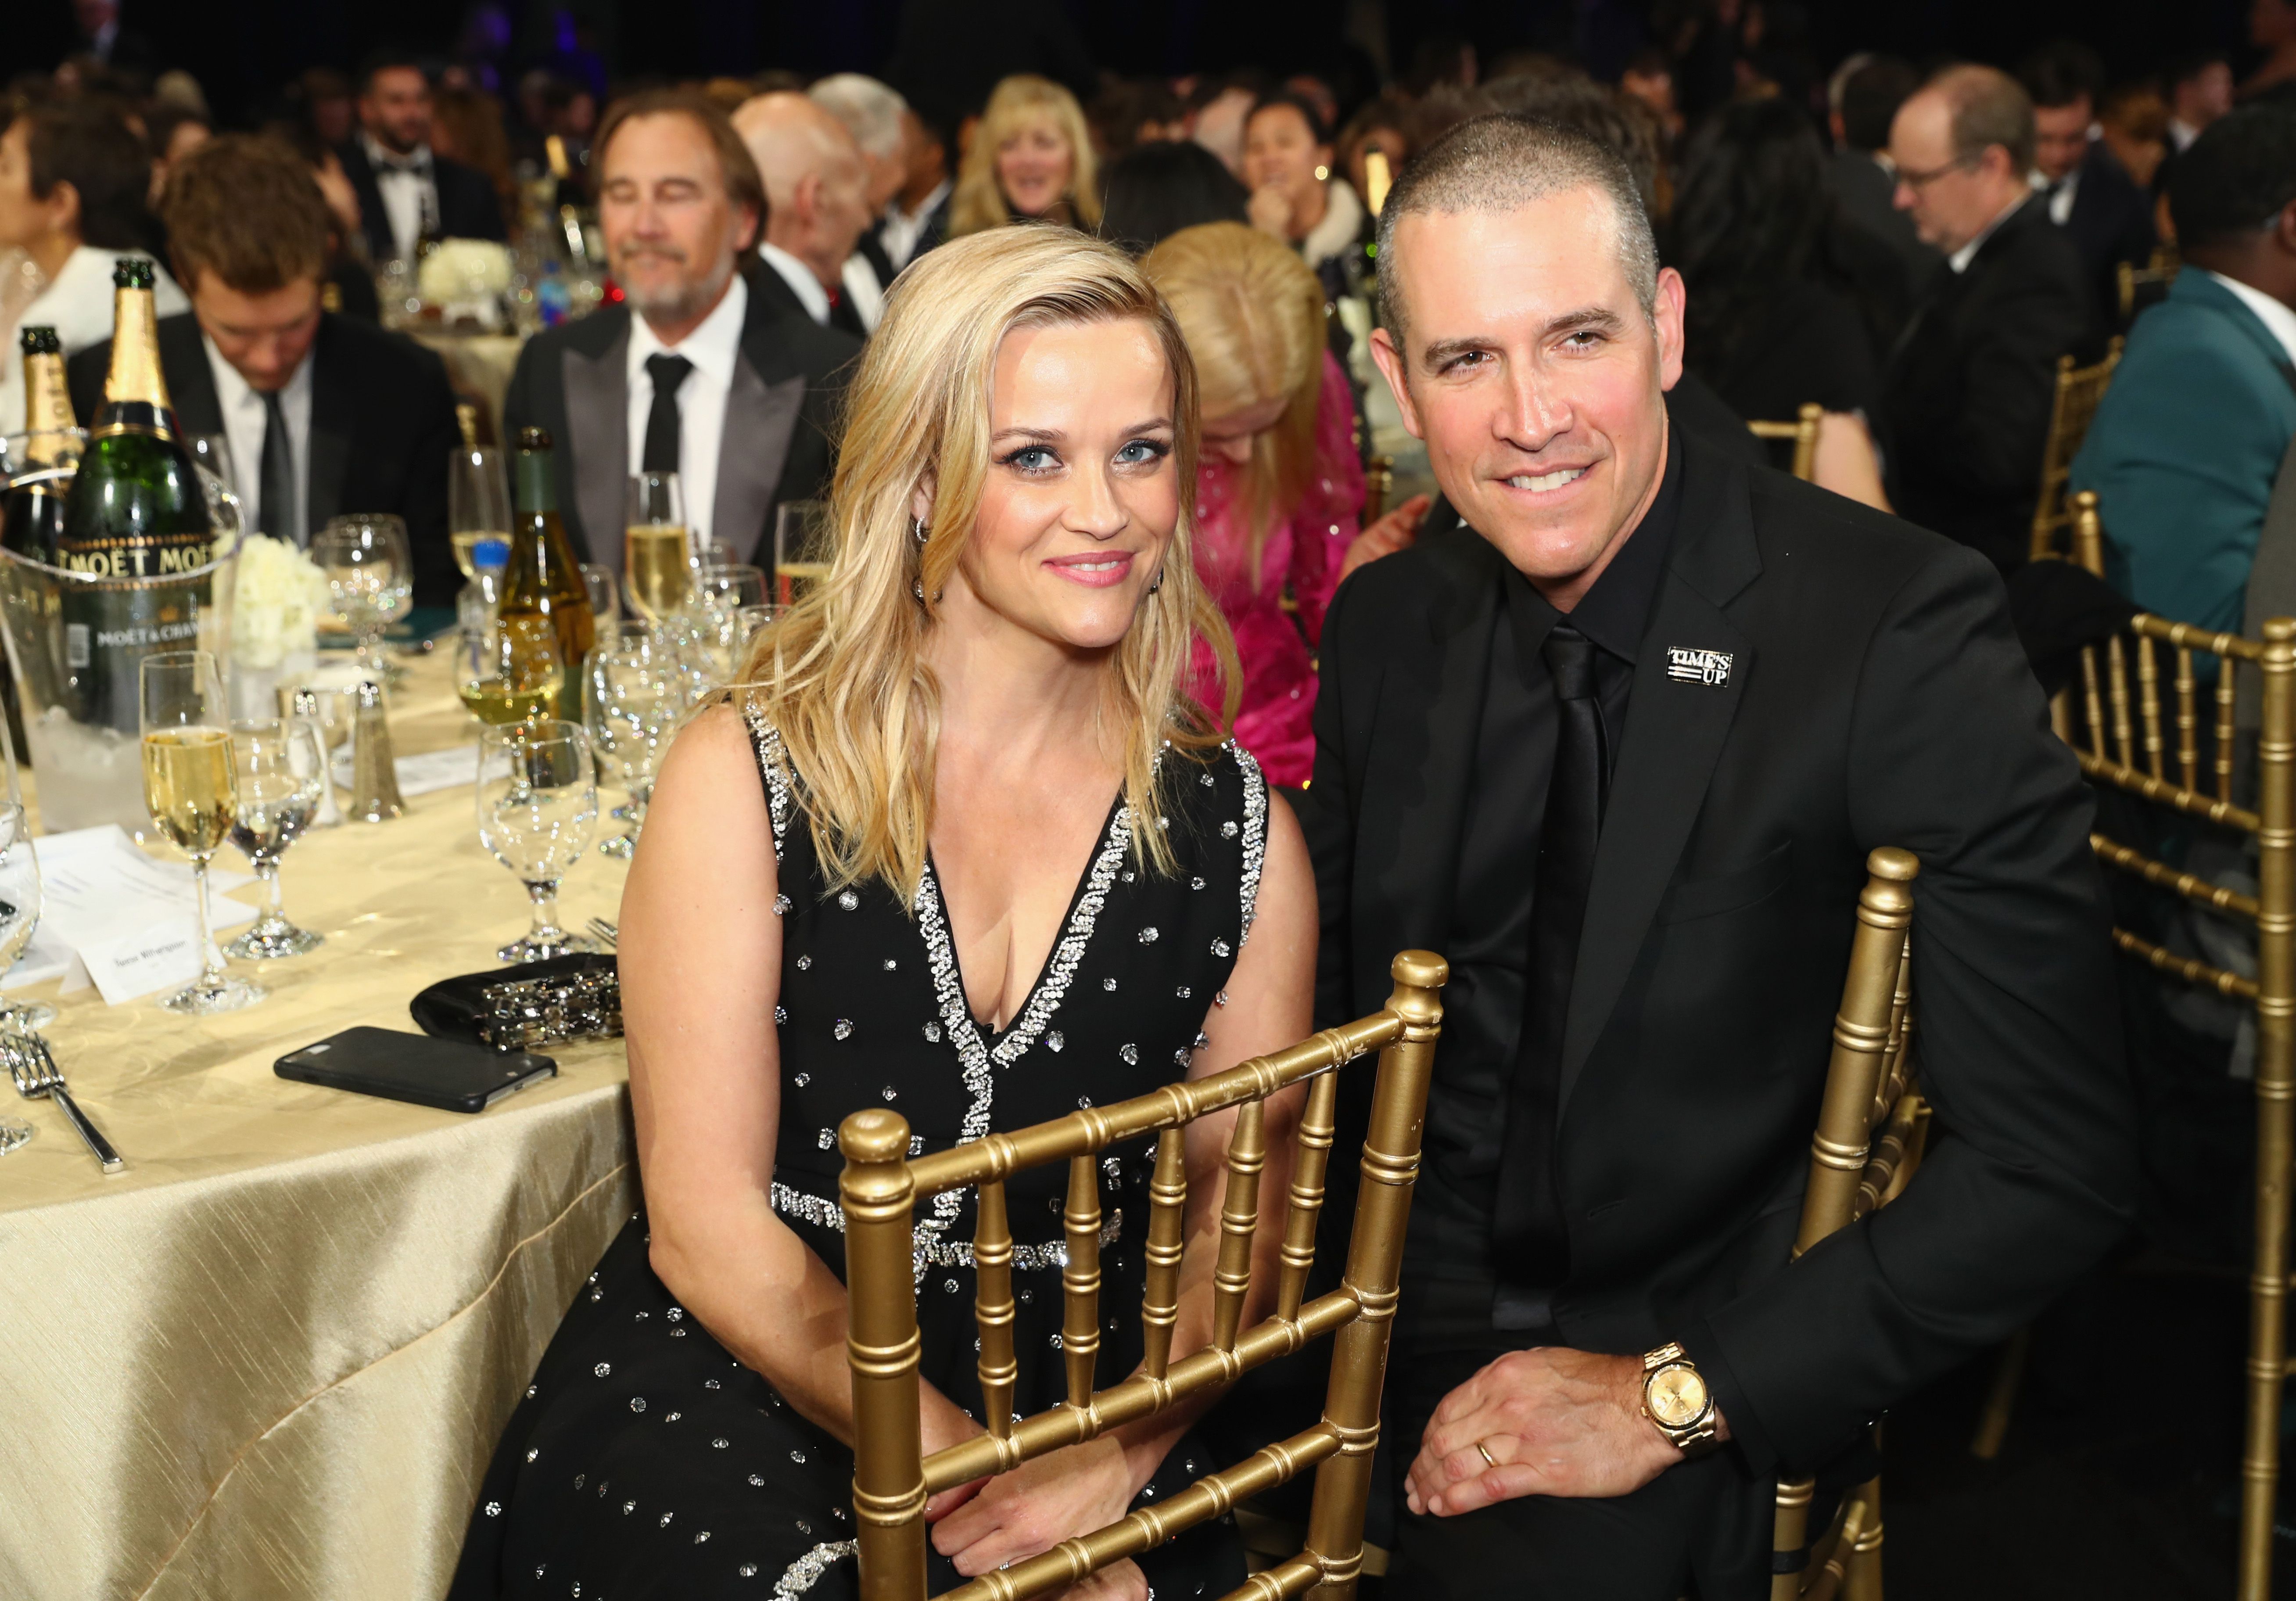 Reese Witherspoon and husband Jim Toth at the 23rd Annual Critics' Choice Awards in 2018 in Santa Monica, California | Source: Getty Images